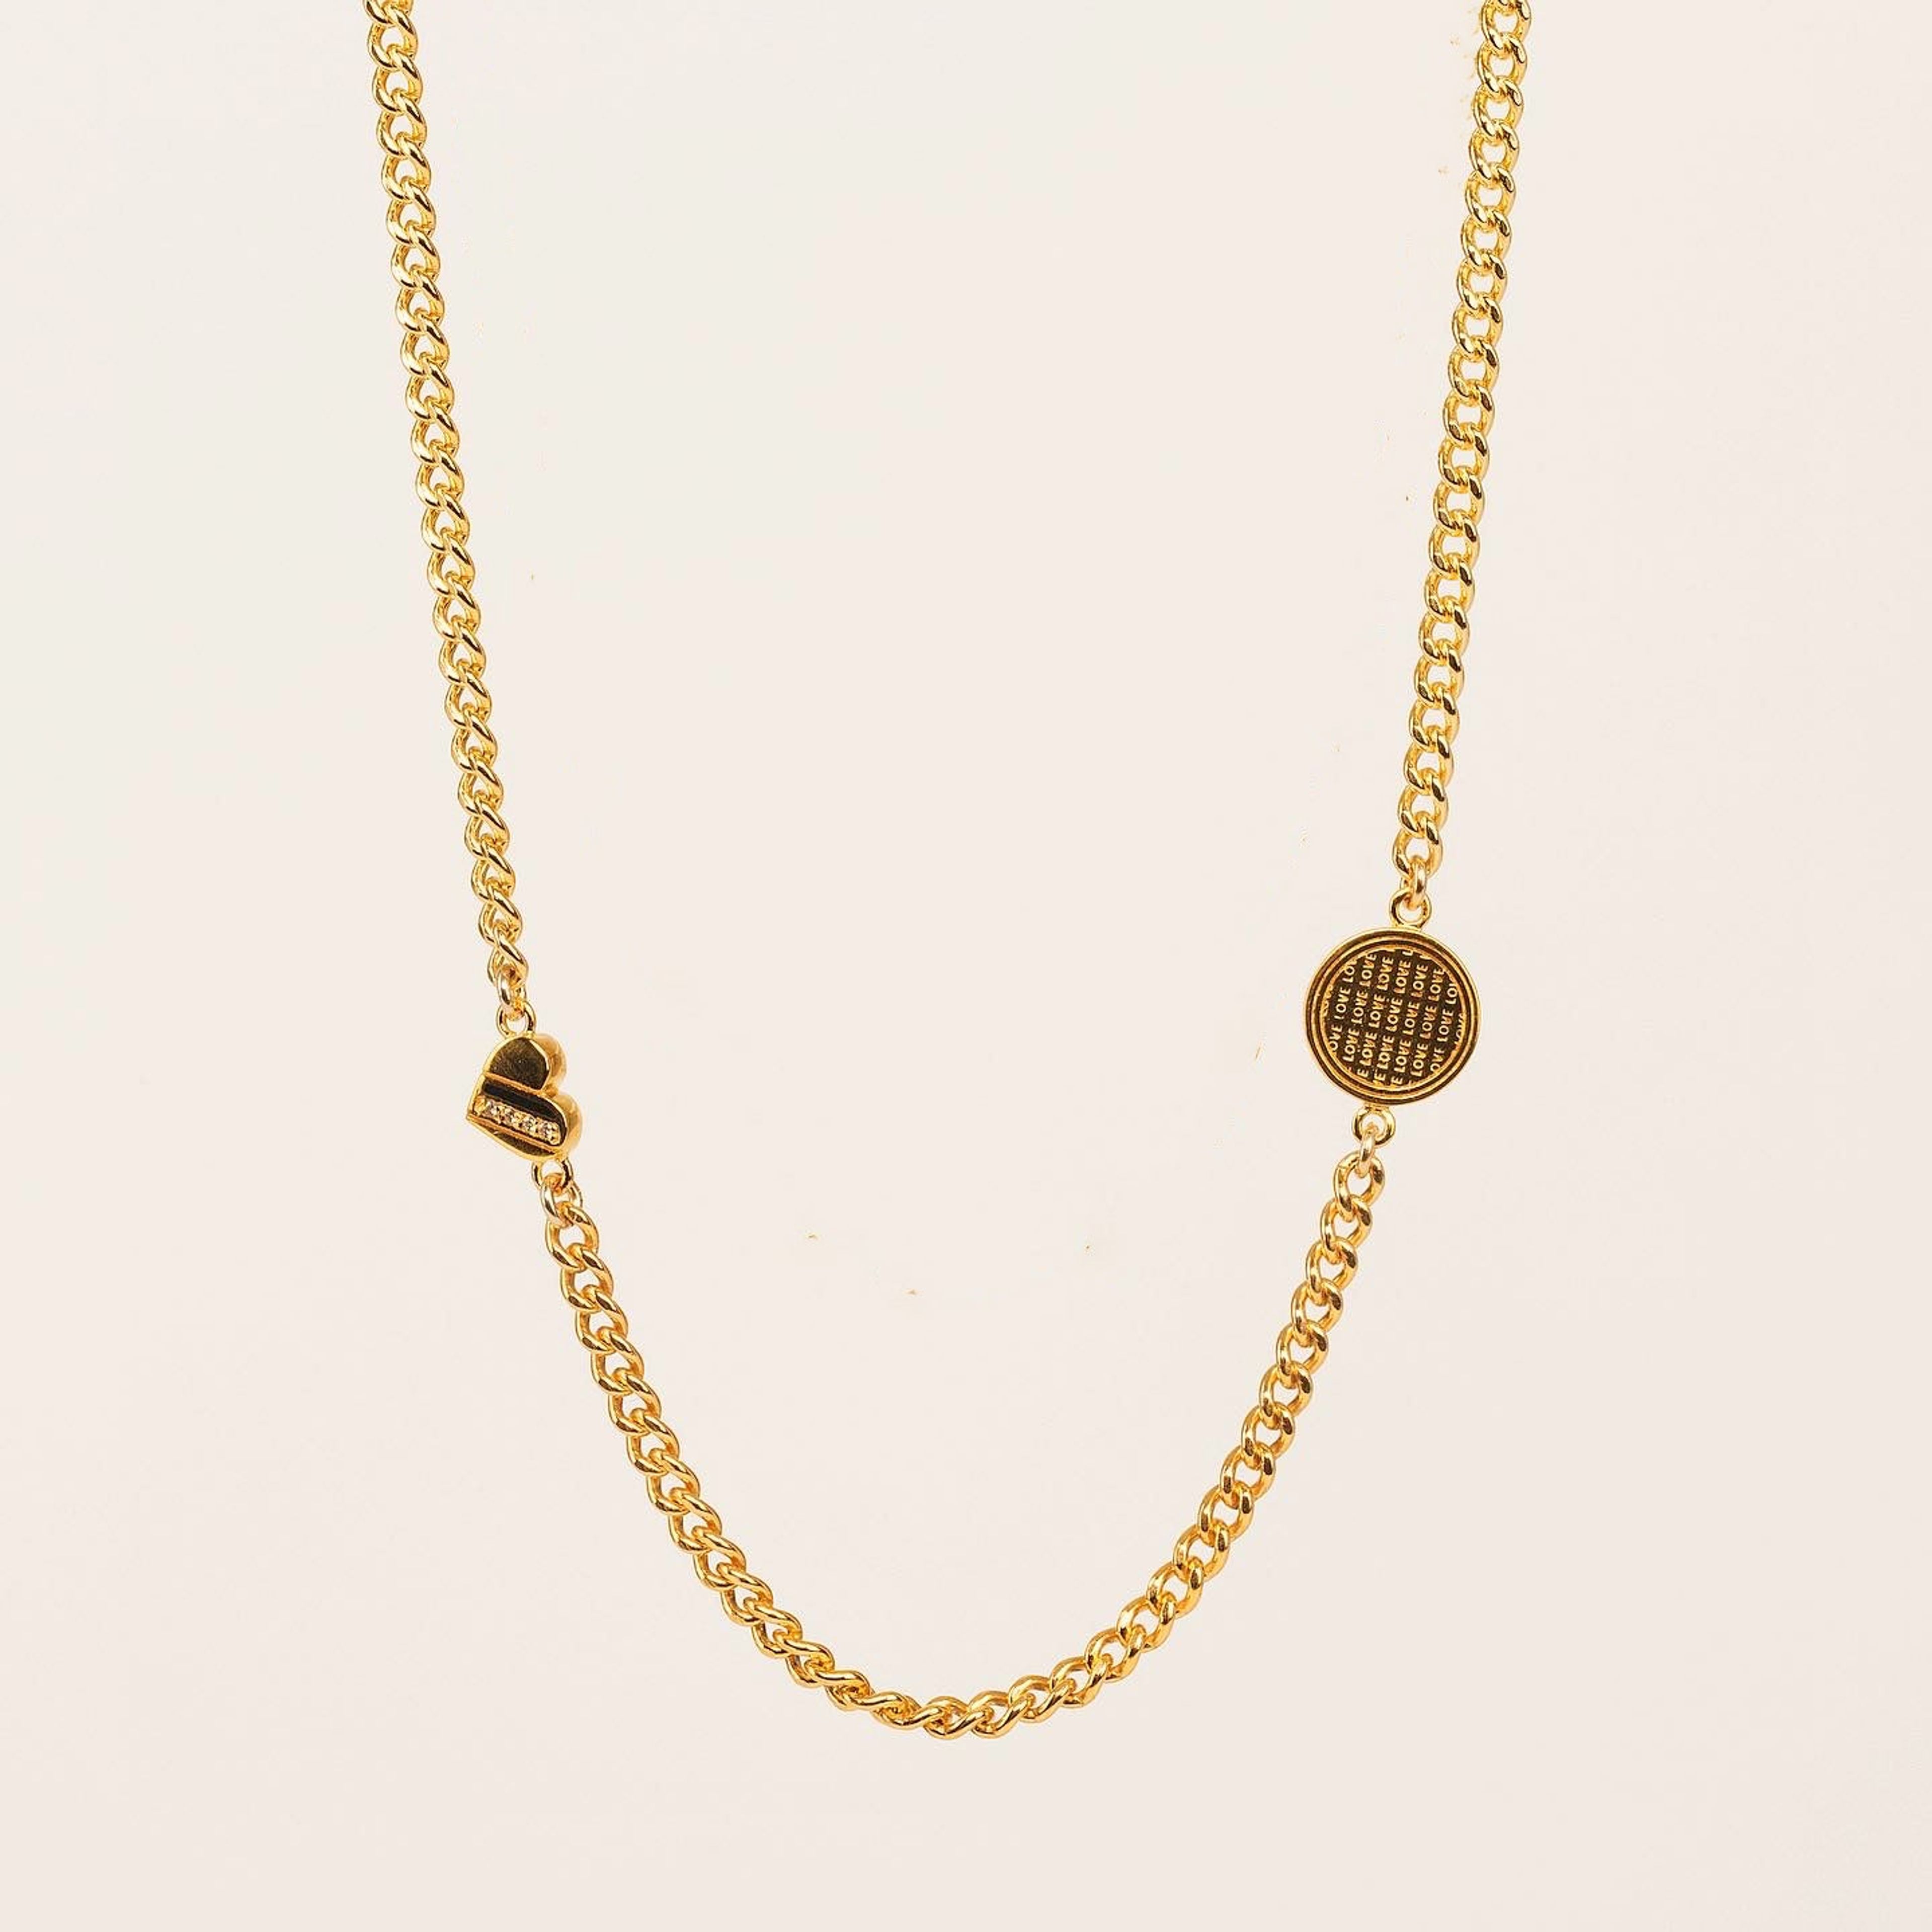 Double Spaced Love Charm Necklace